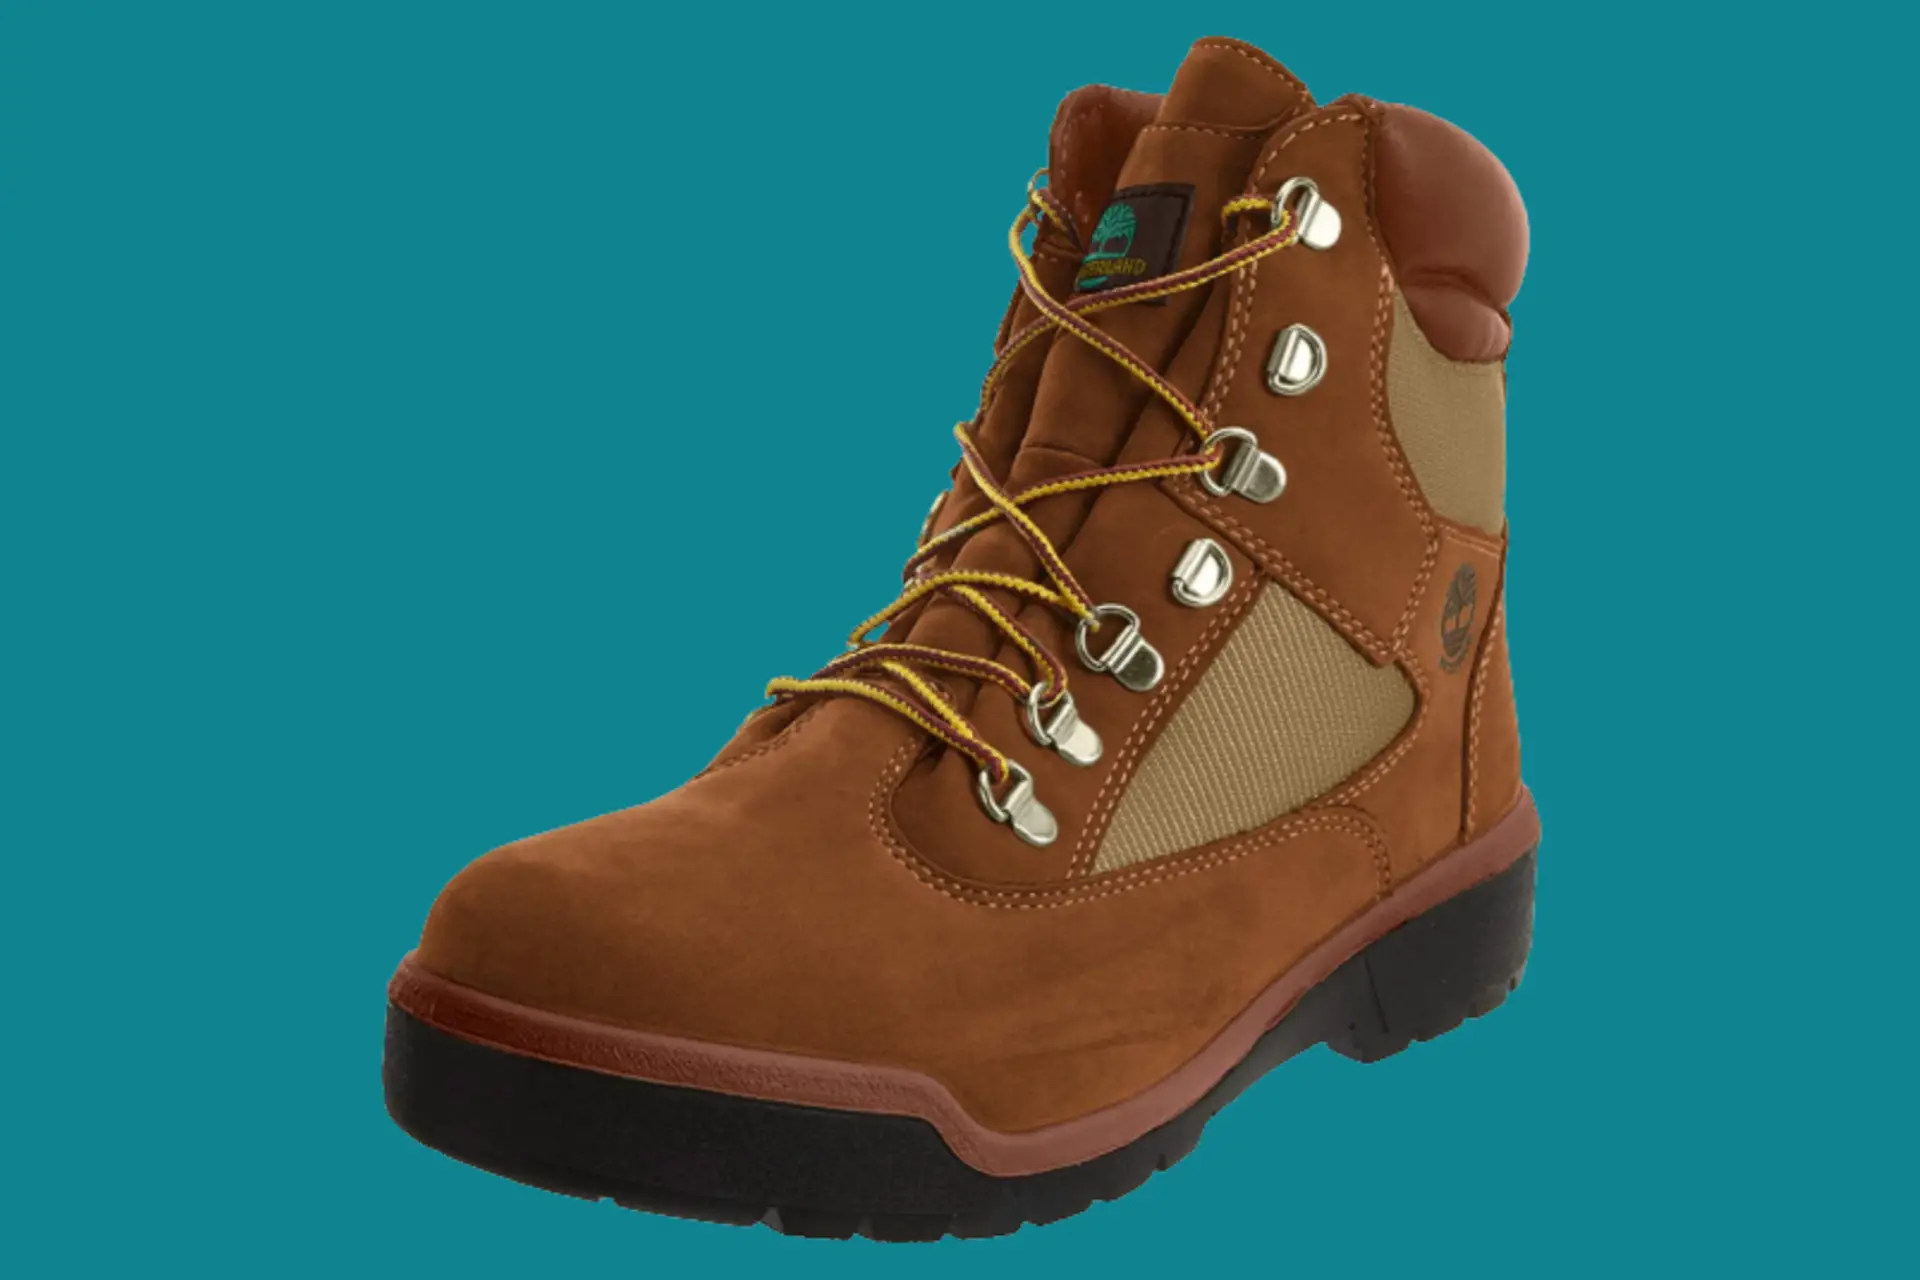 Best Timberland hiking boots